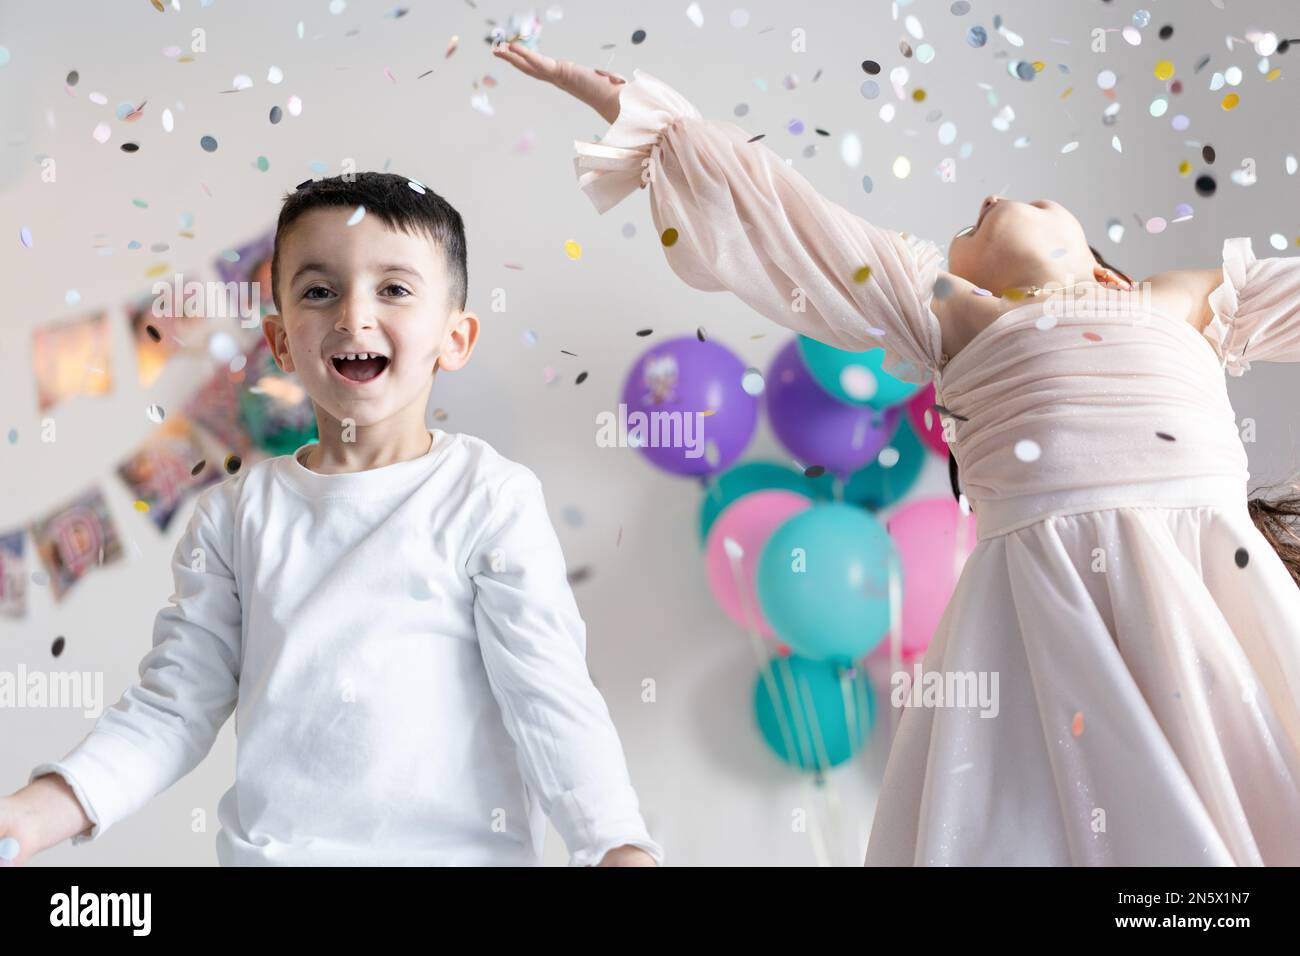 Two kids throwing colorful confetti and looking happy on birthday party. Stock Photo